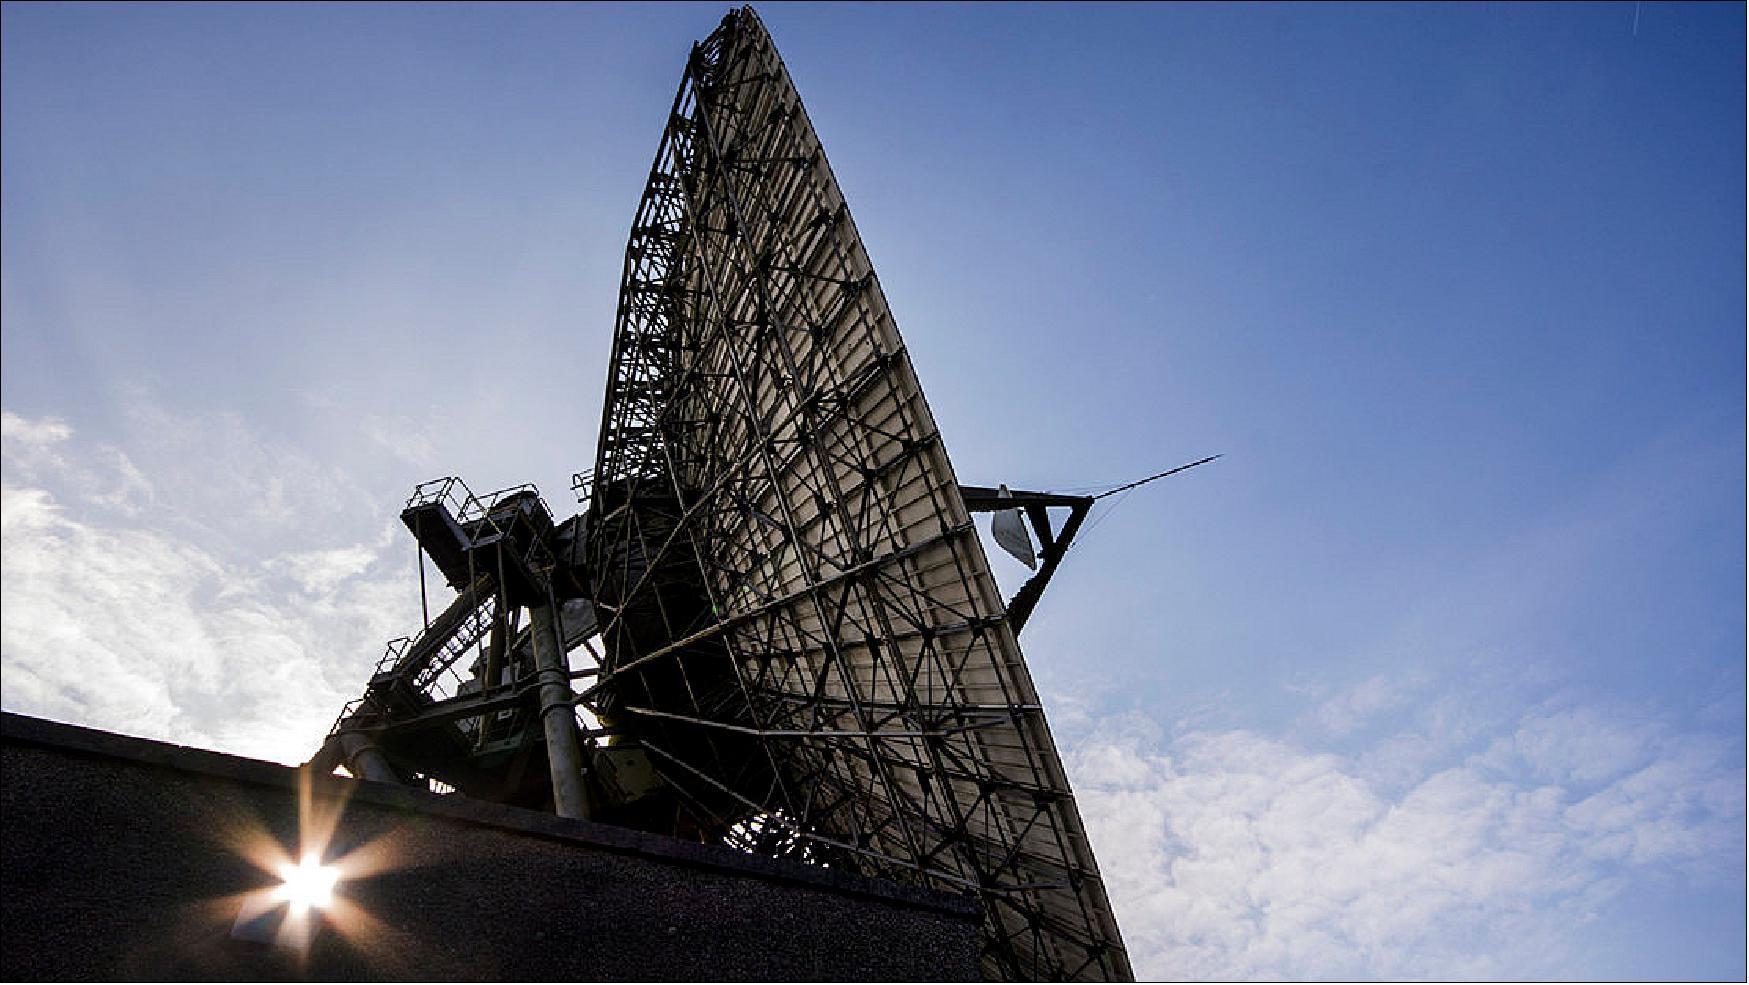 Figure 32: Goonhilly Earth Station, a commercial tracking station in Cornwall, UK, will be upgraded to provide Europe’s first deep-space services on a commercial basis (image credit: GES - Goonhilly Earth Station Ltd.)